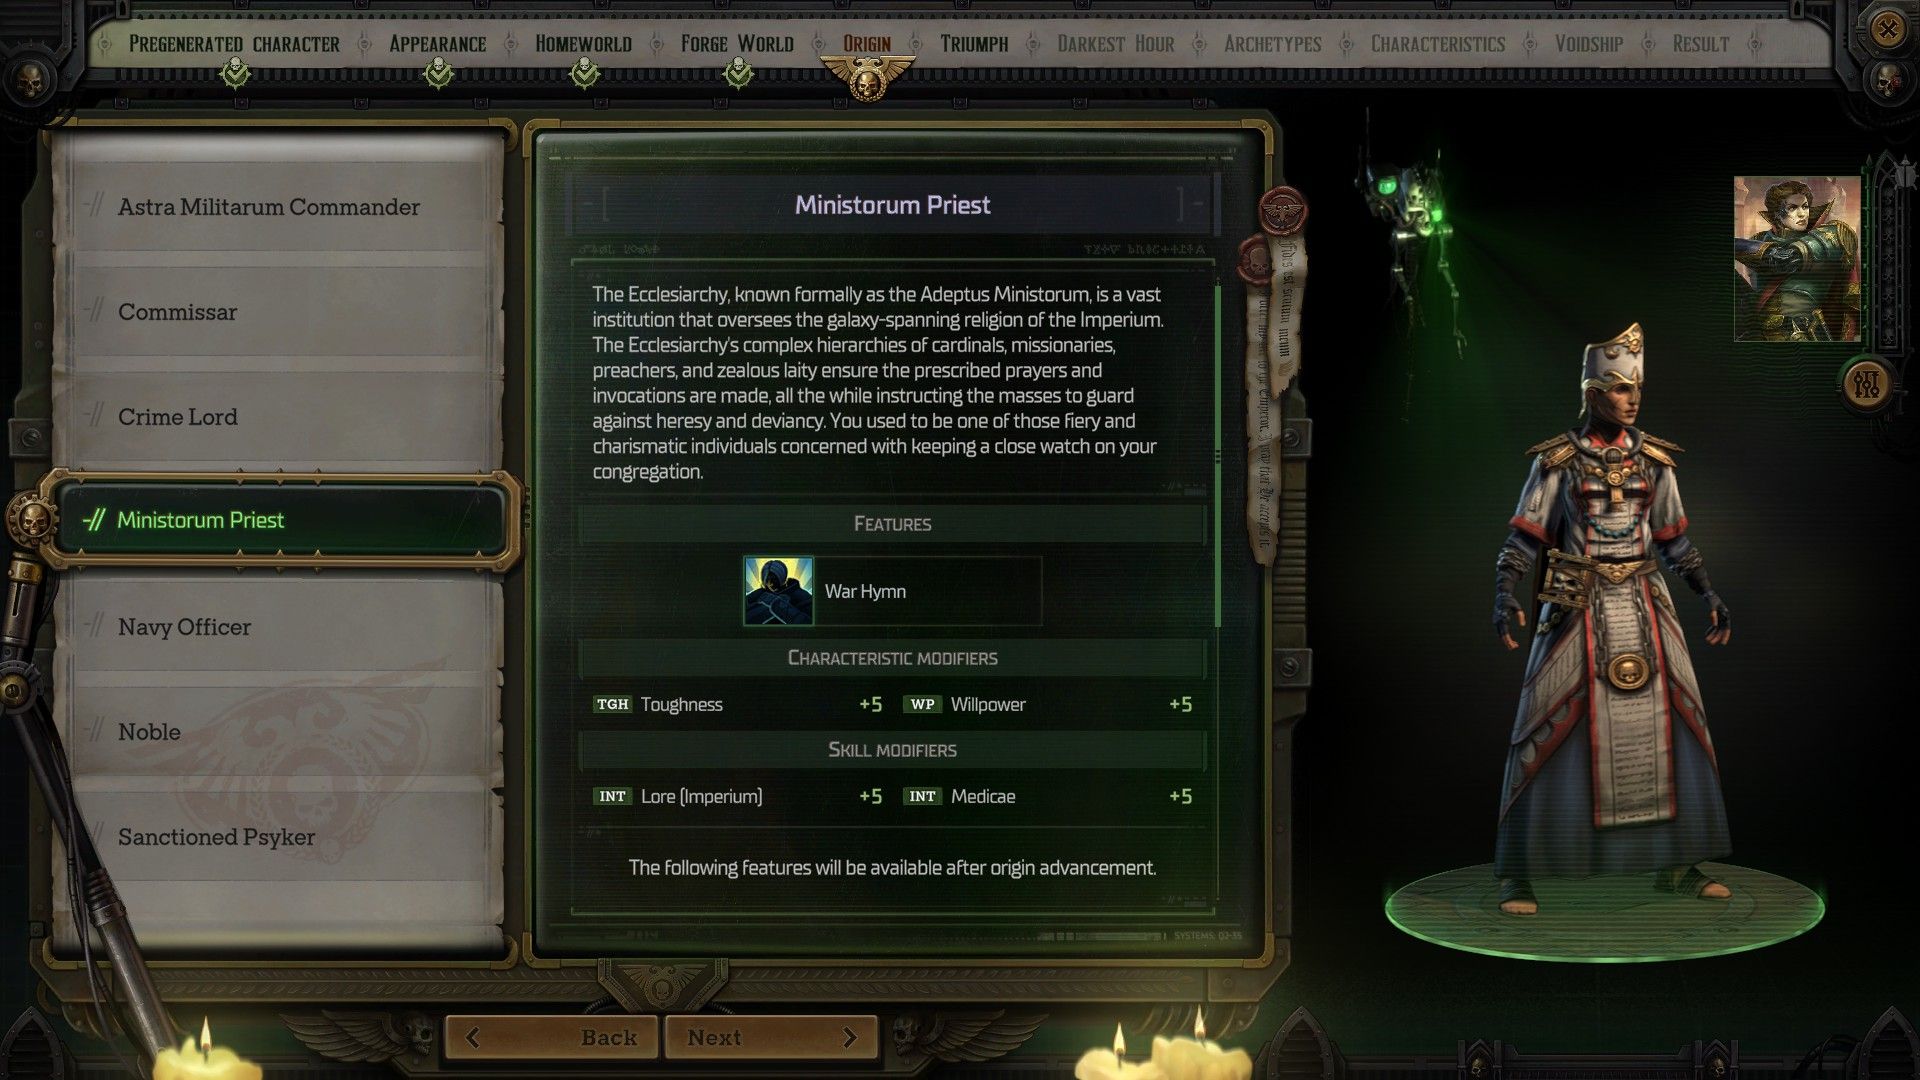 the character creation screen in rogue trader featuring the ministorum priest